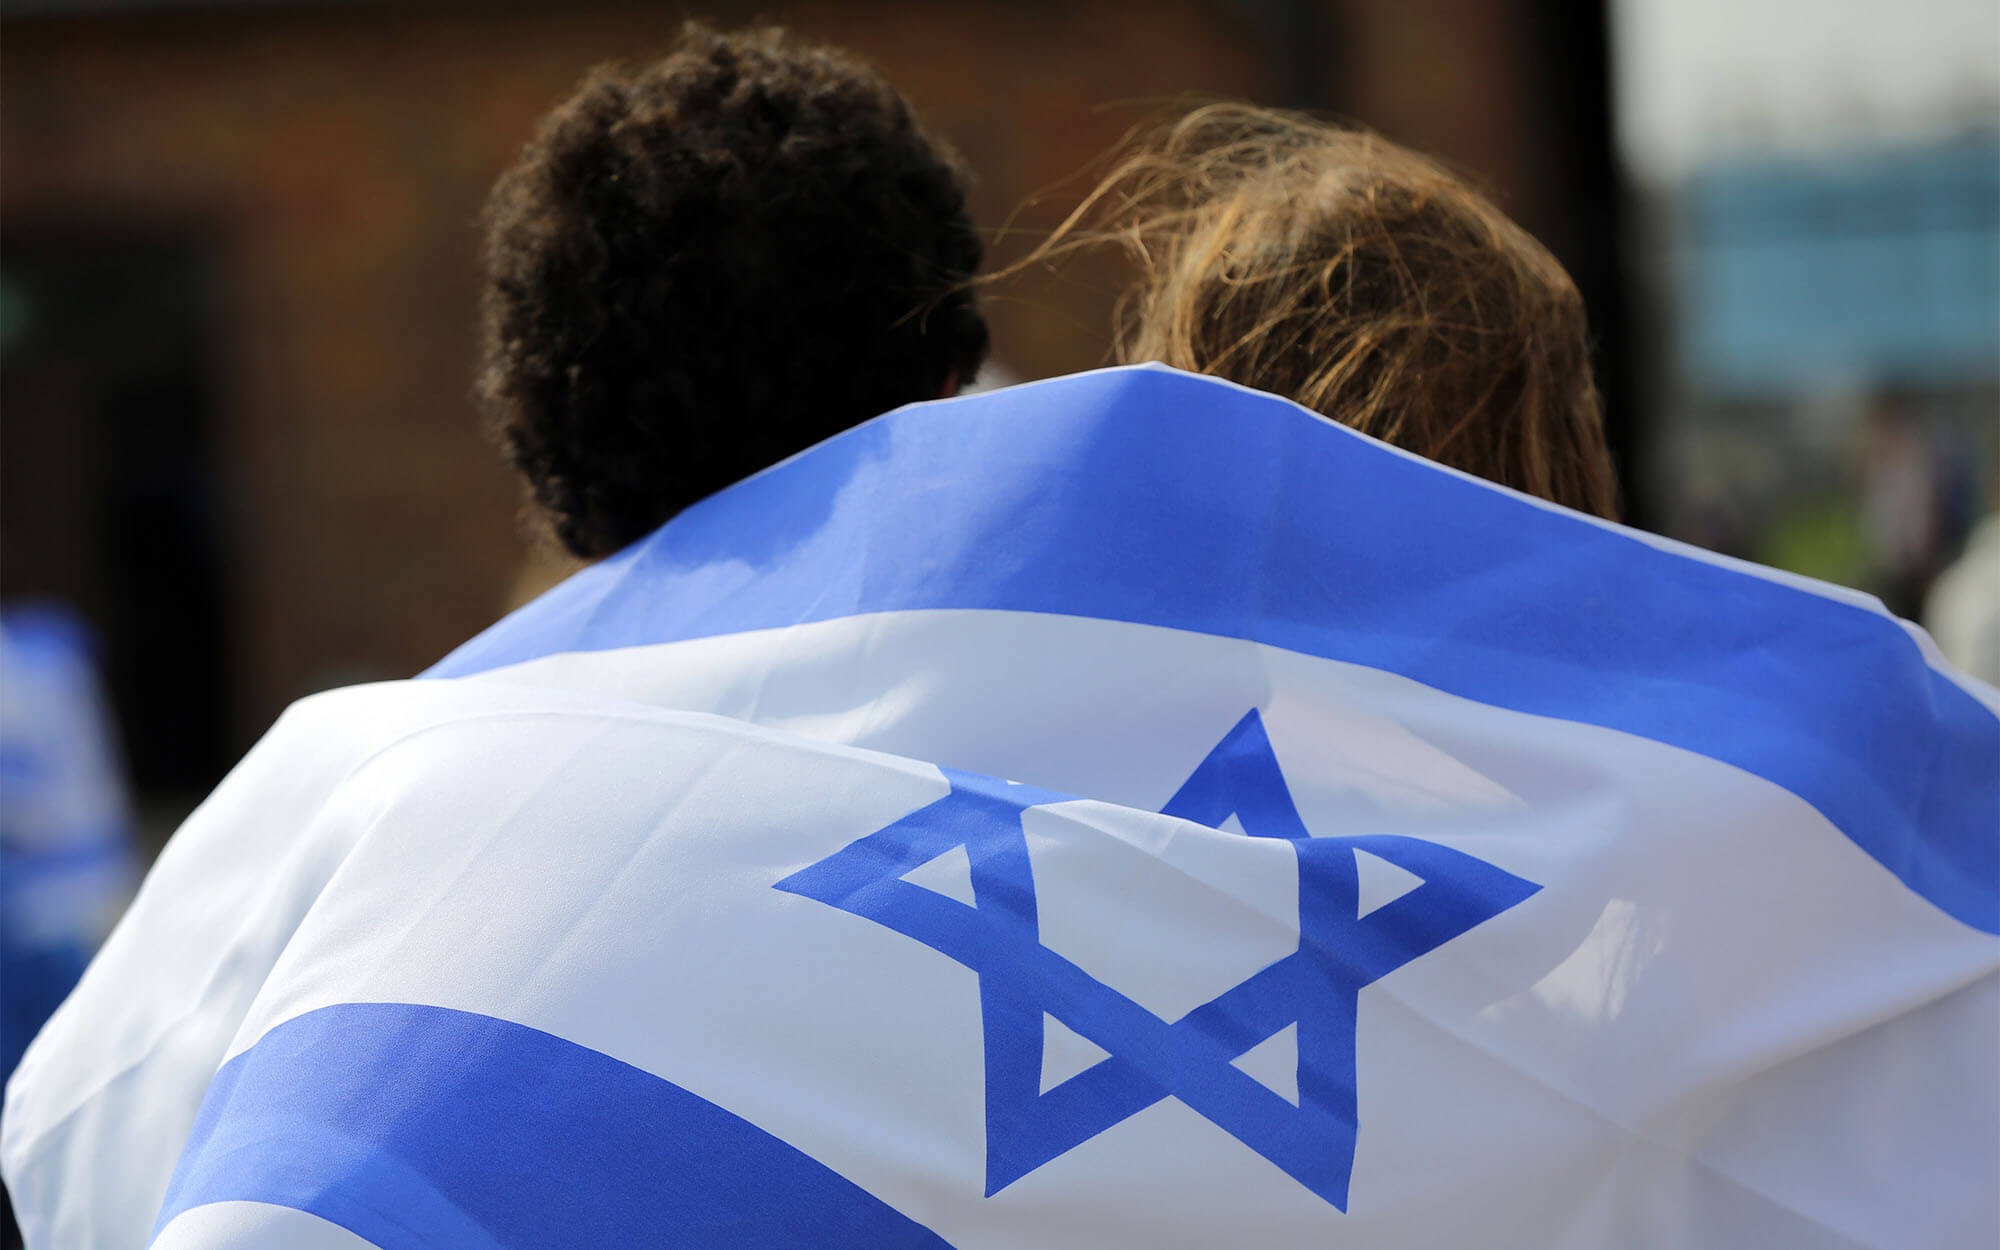 Two people wrapped in the flag of Israel at International Holocaust Remembrance Day